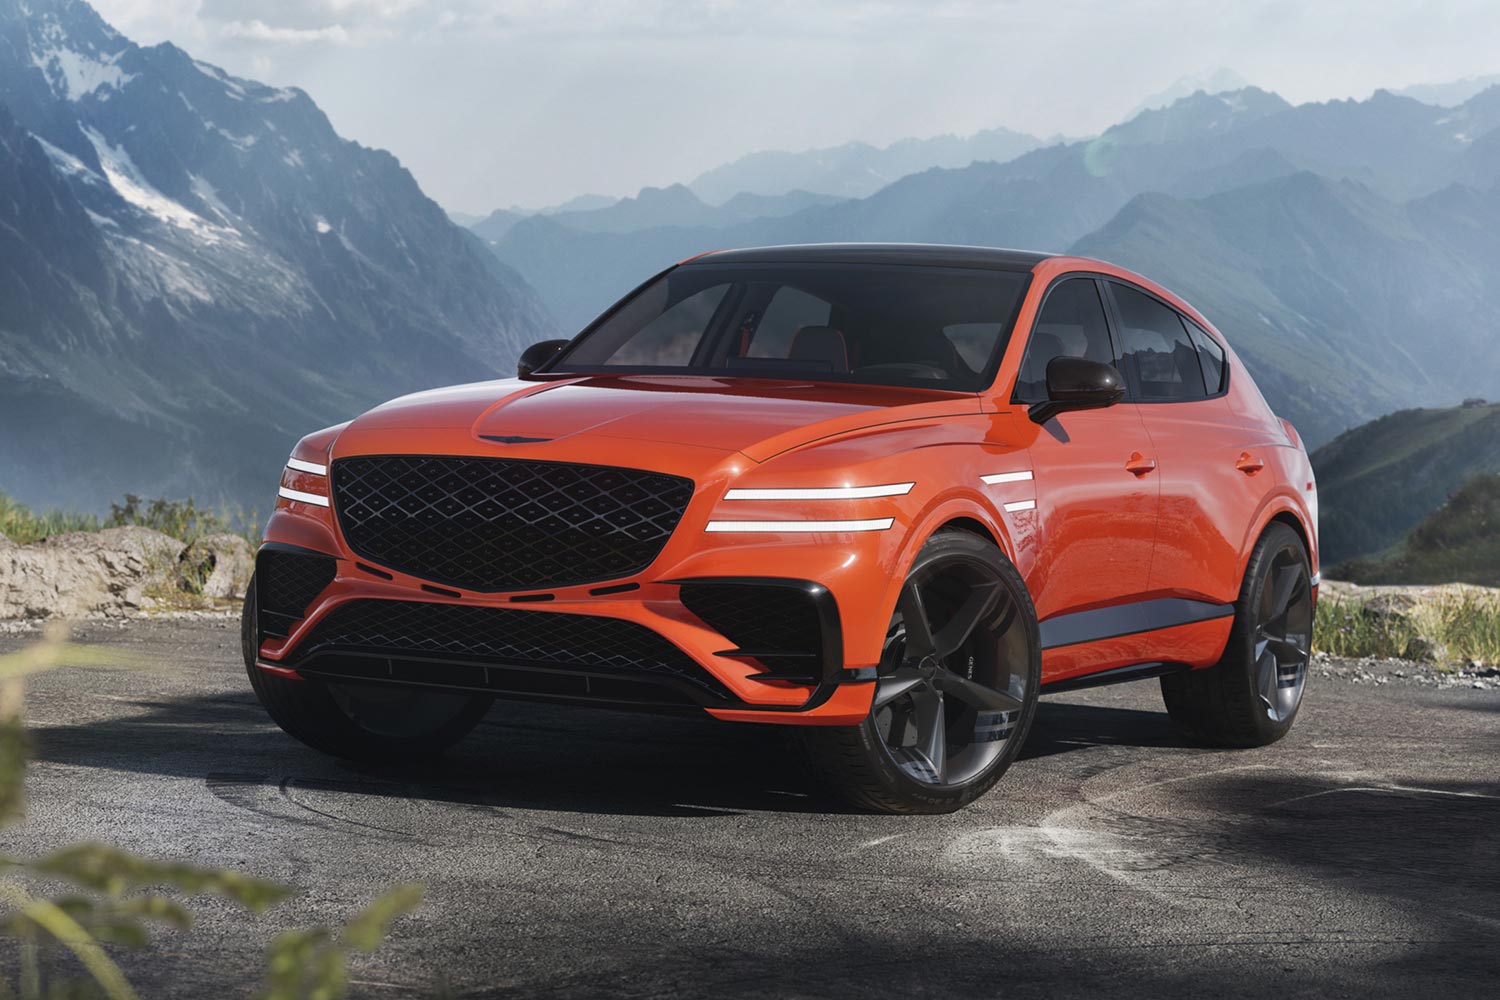 Genesis GV80 Coupe Concept, which debuted at the 2023 New York Auto Show